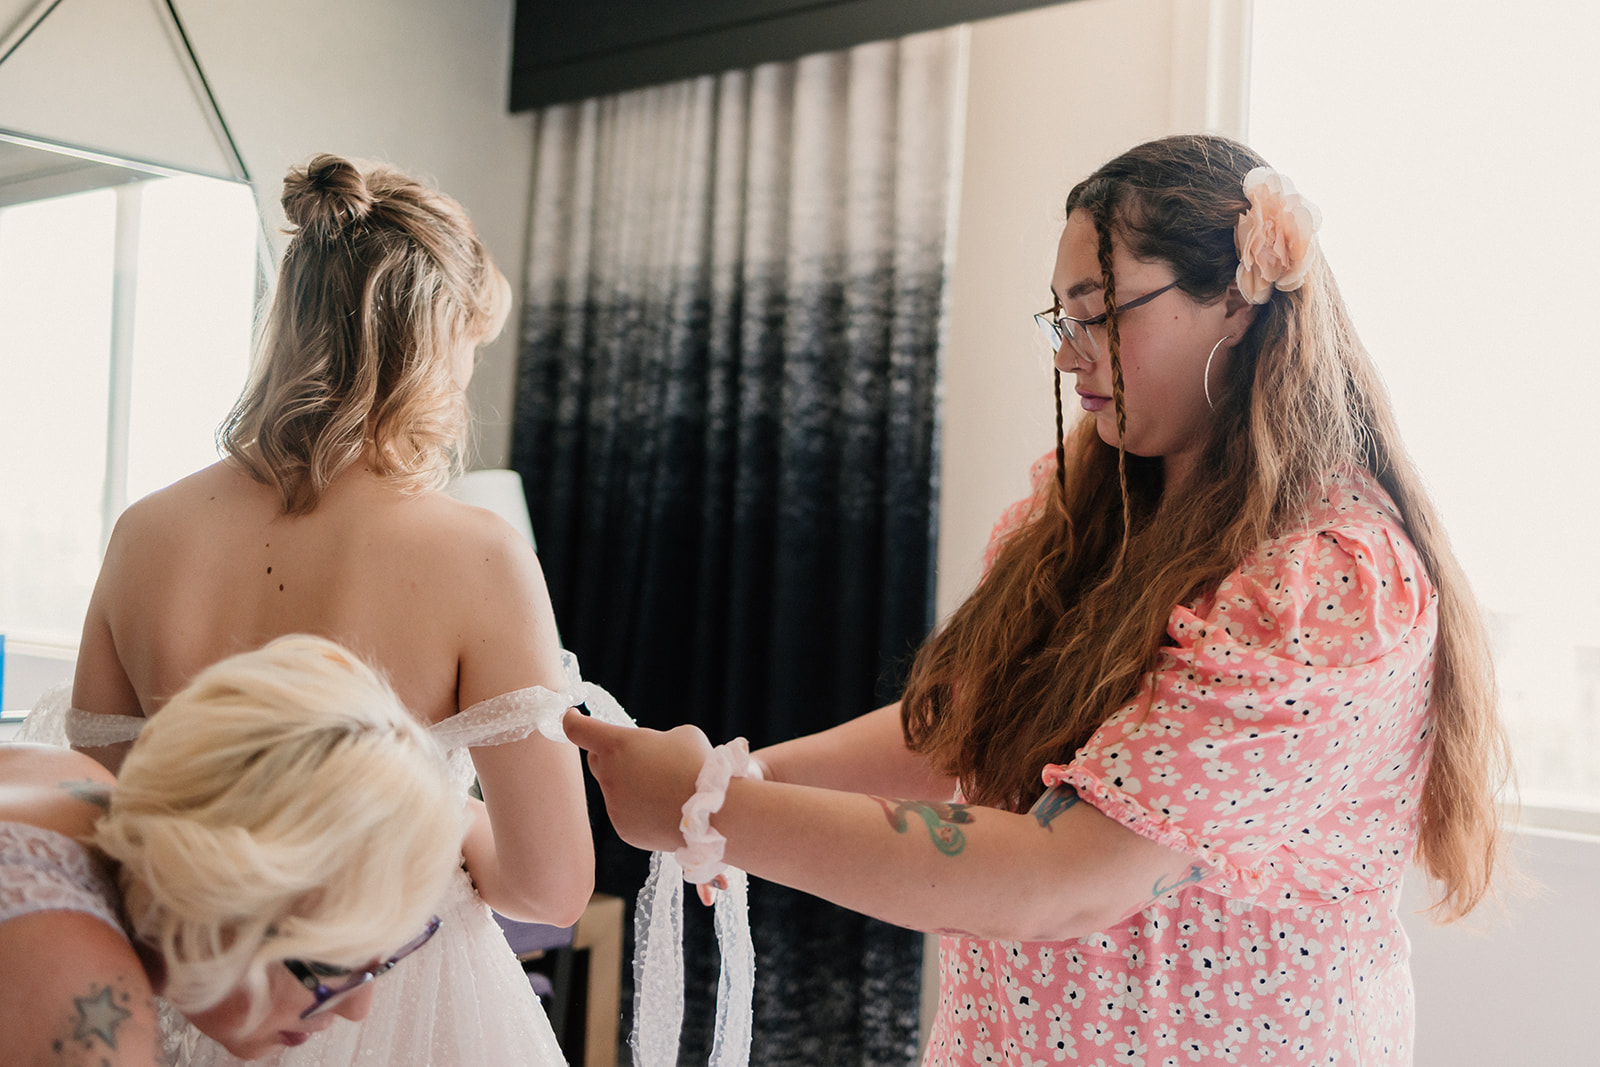 A woman in a wedding dress stands as another woman in a lavender dress adjusts the back of the gown.